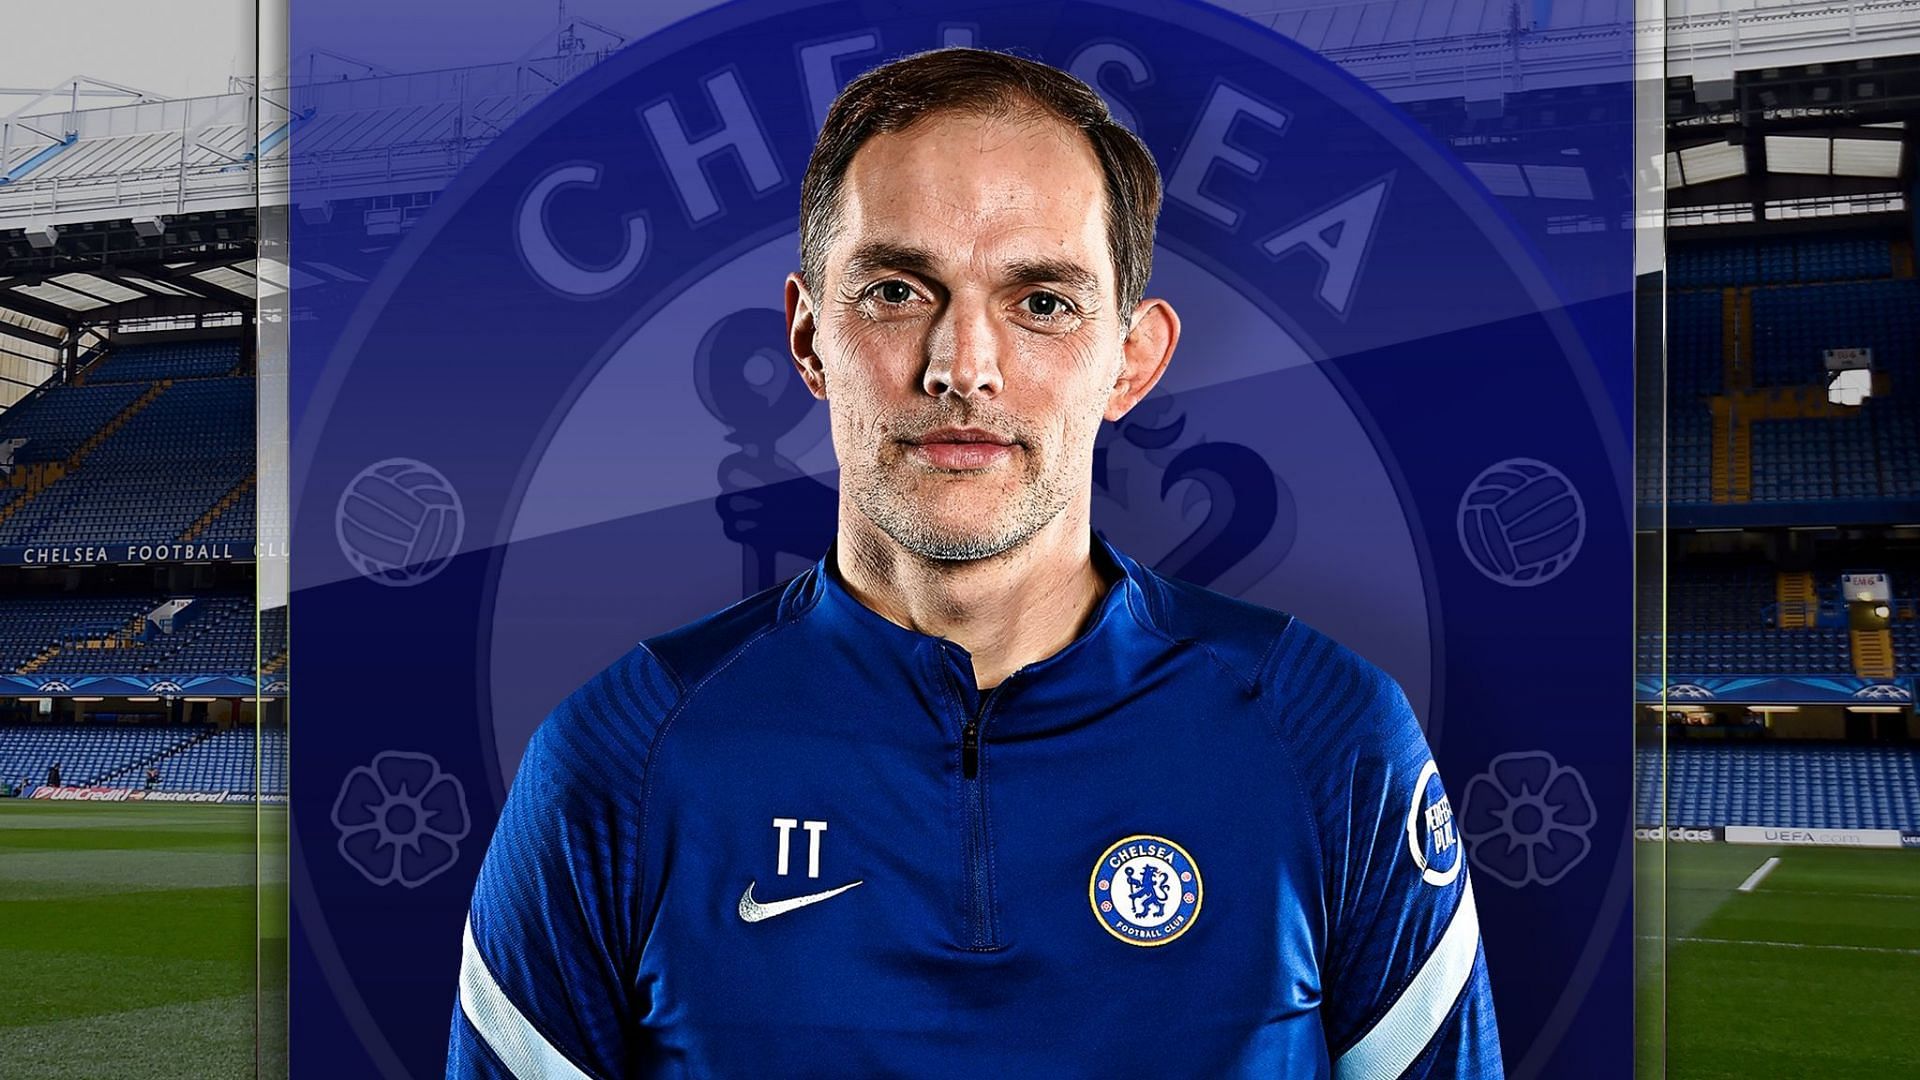 Thomas Tuchel has done well in his first year in charge of Chelsea.